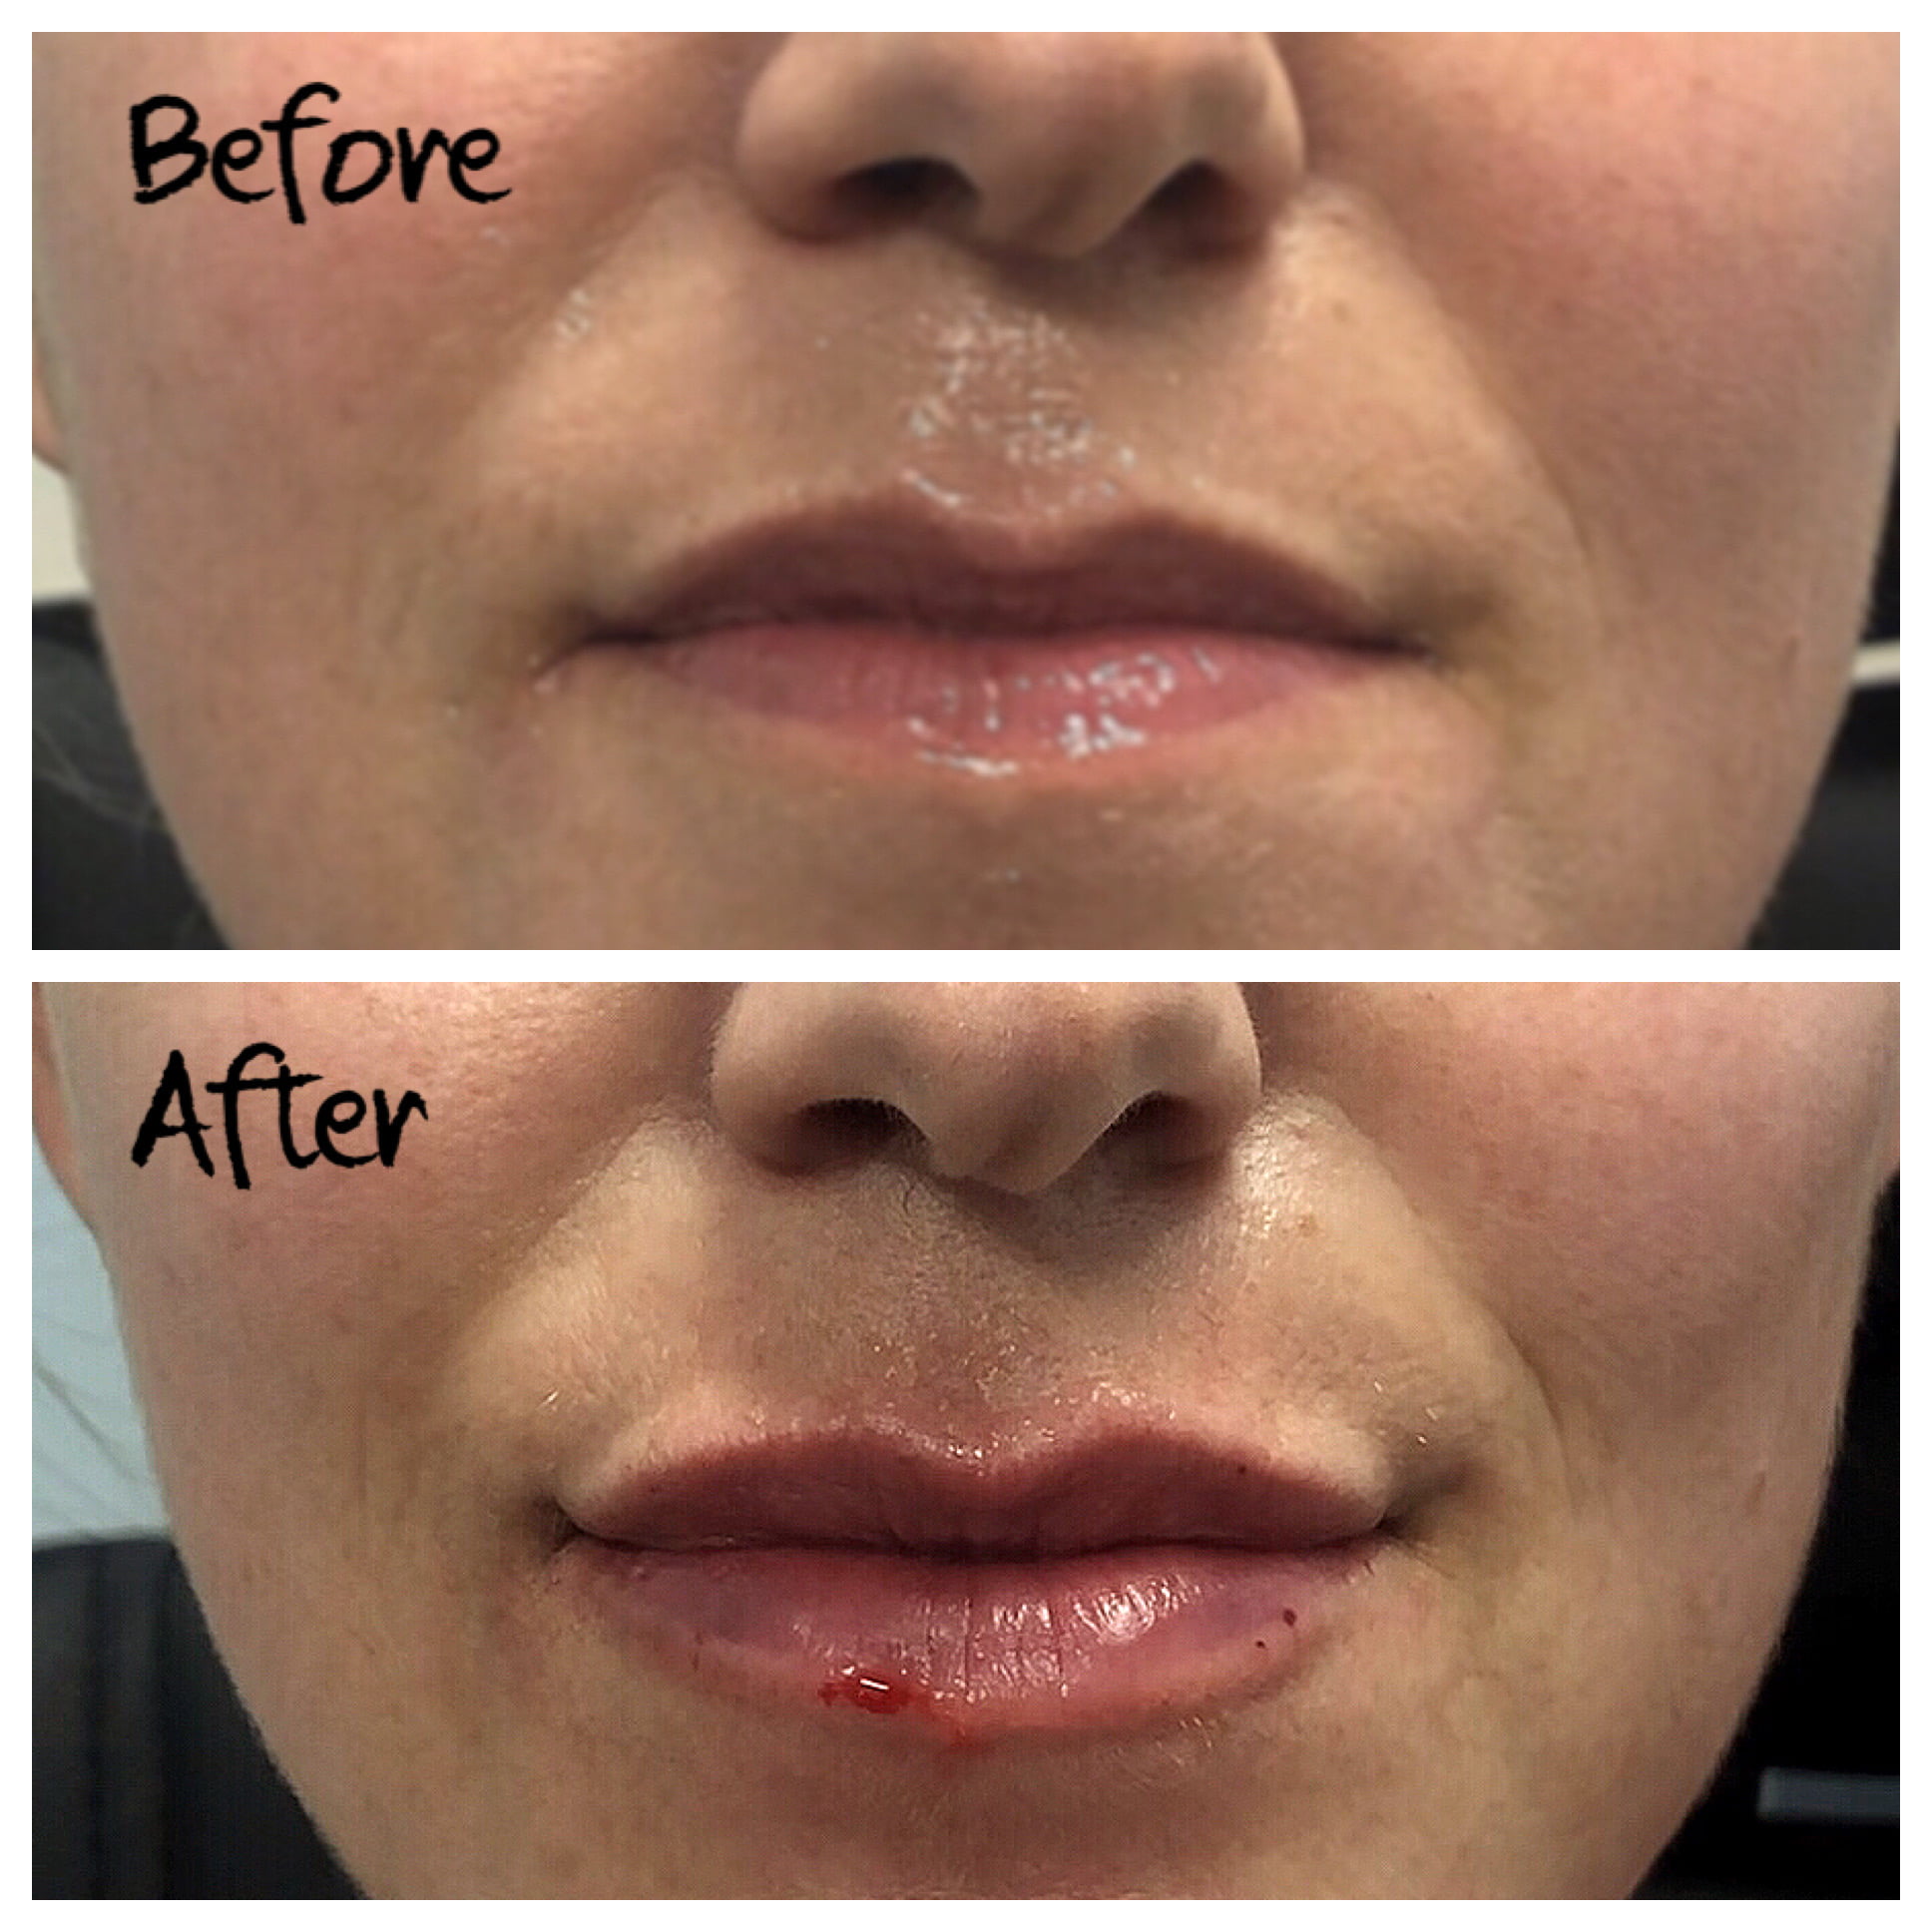 , New Kissable Filler Approved By FDA